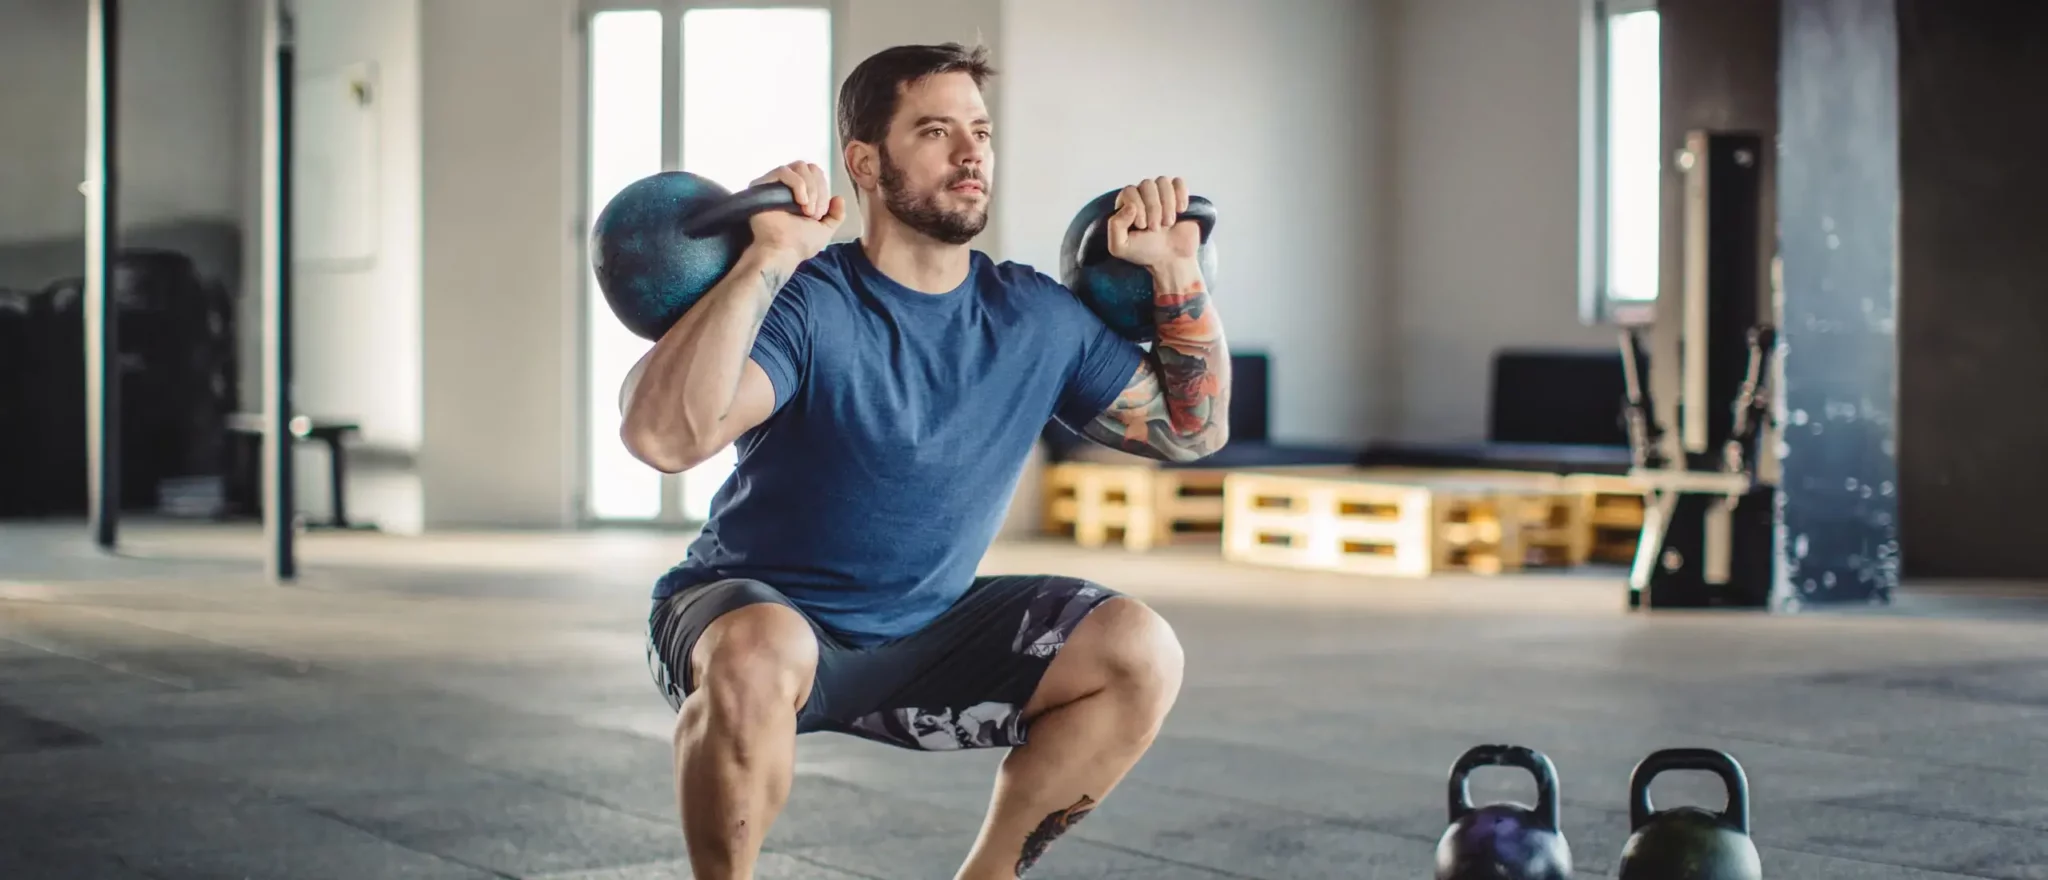 10 Adjustable Kettlebells That Bring the Gym to You